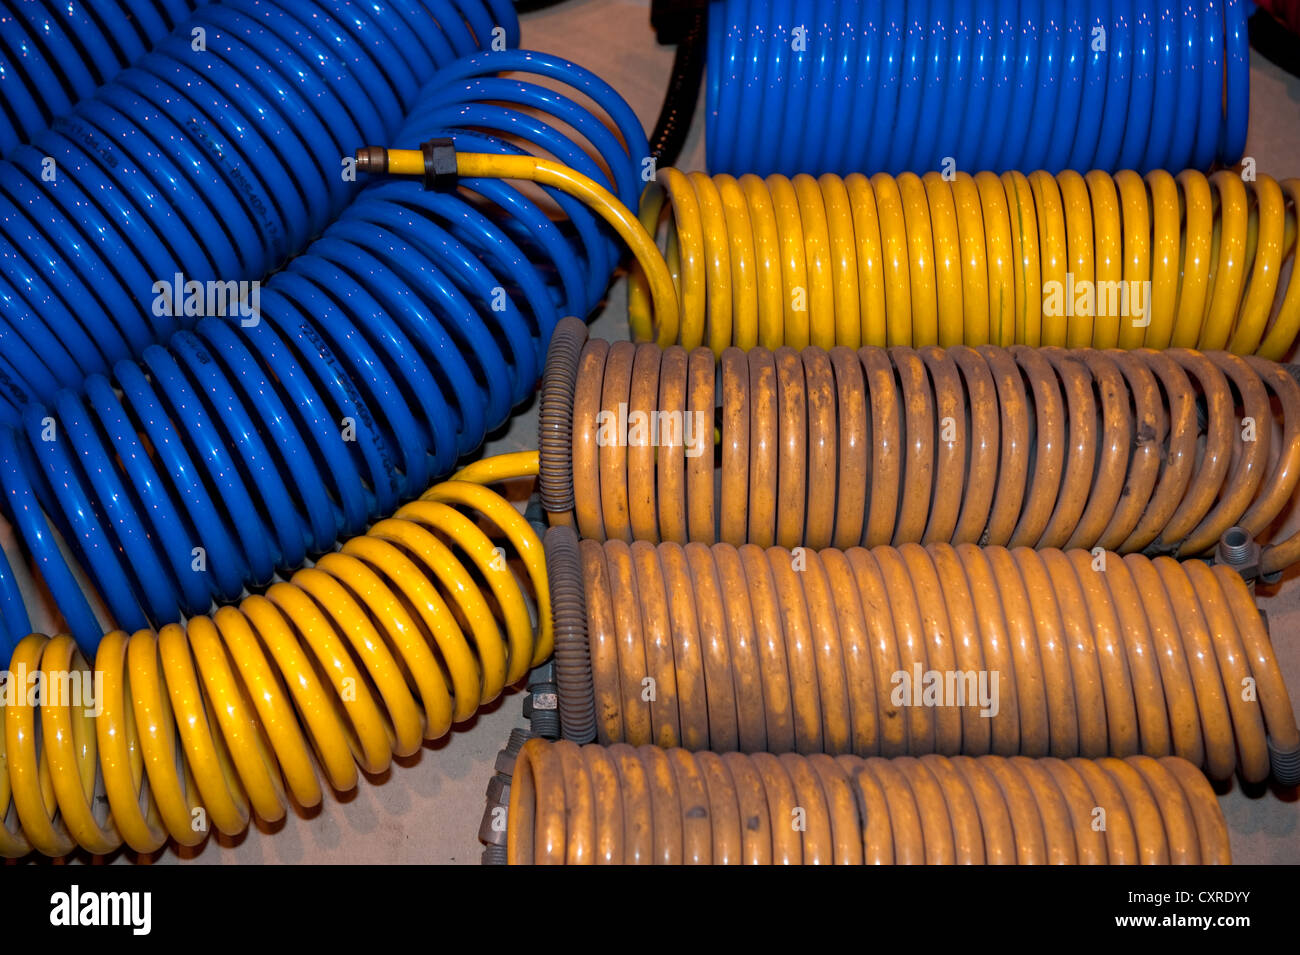 Hydraulic compressed air hoses coiled blue yellow Stock Photo